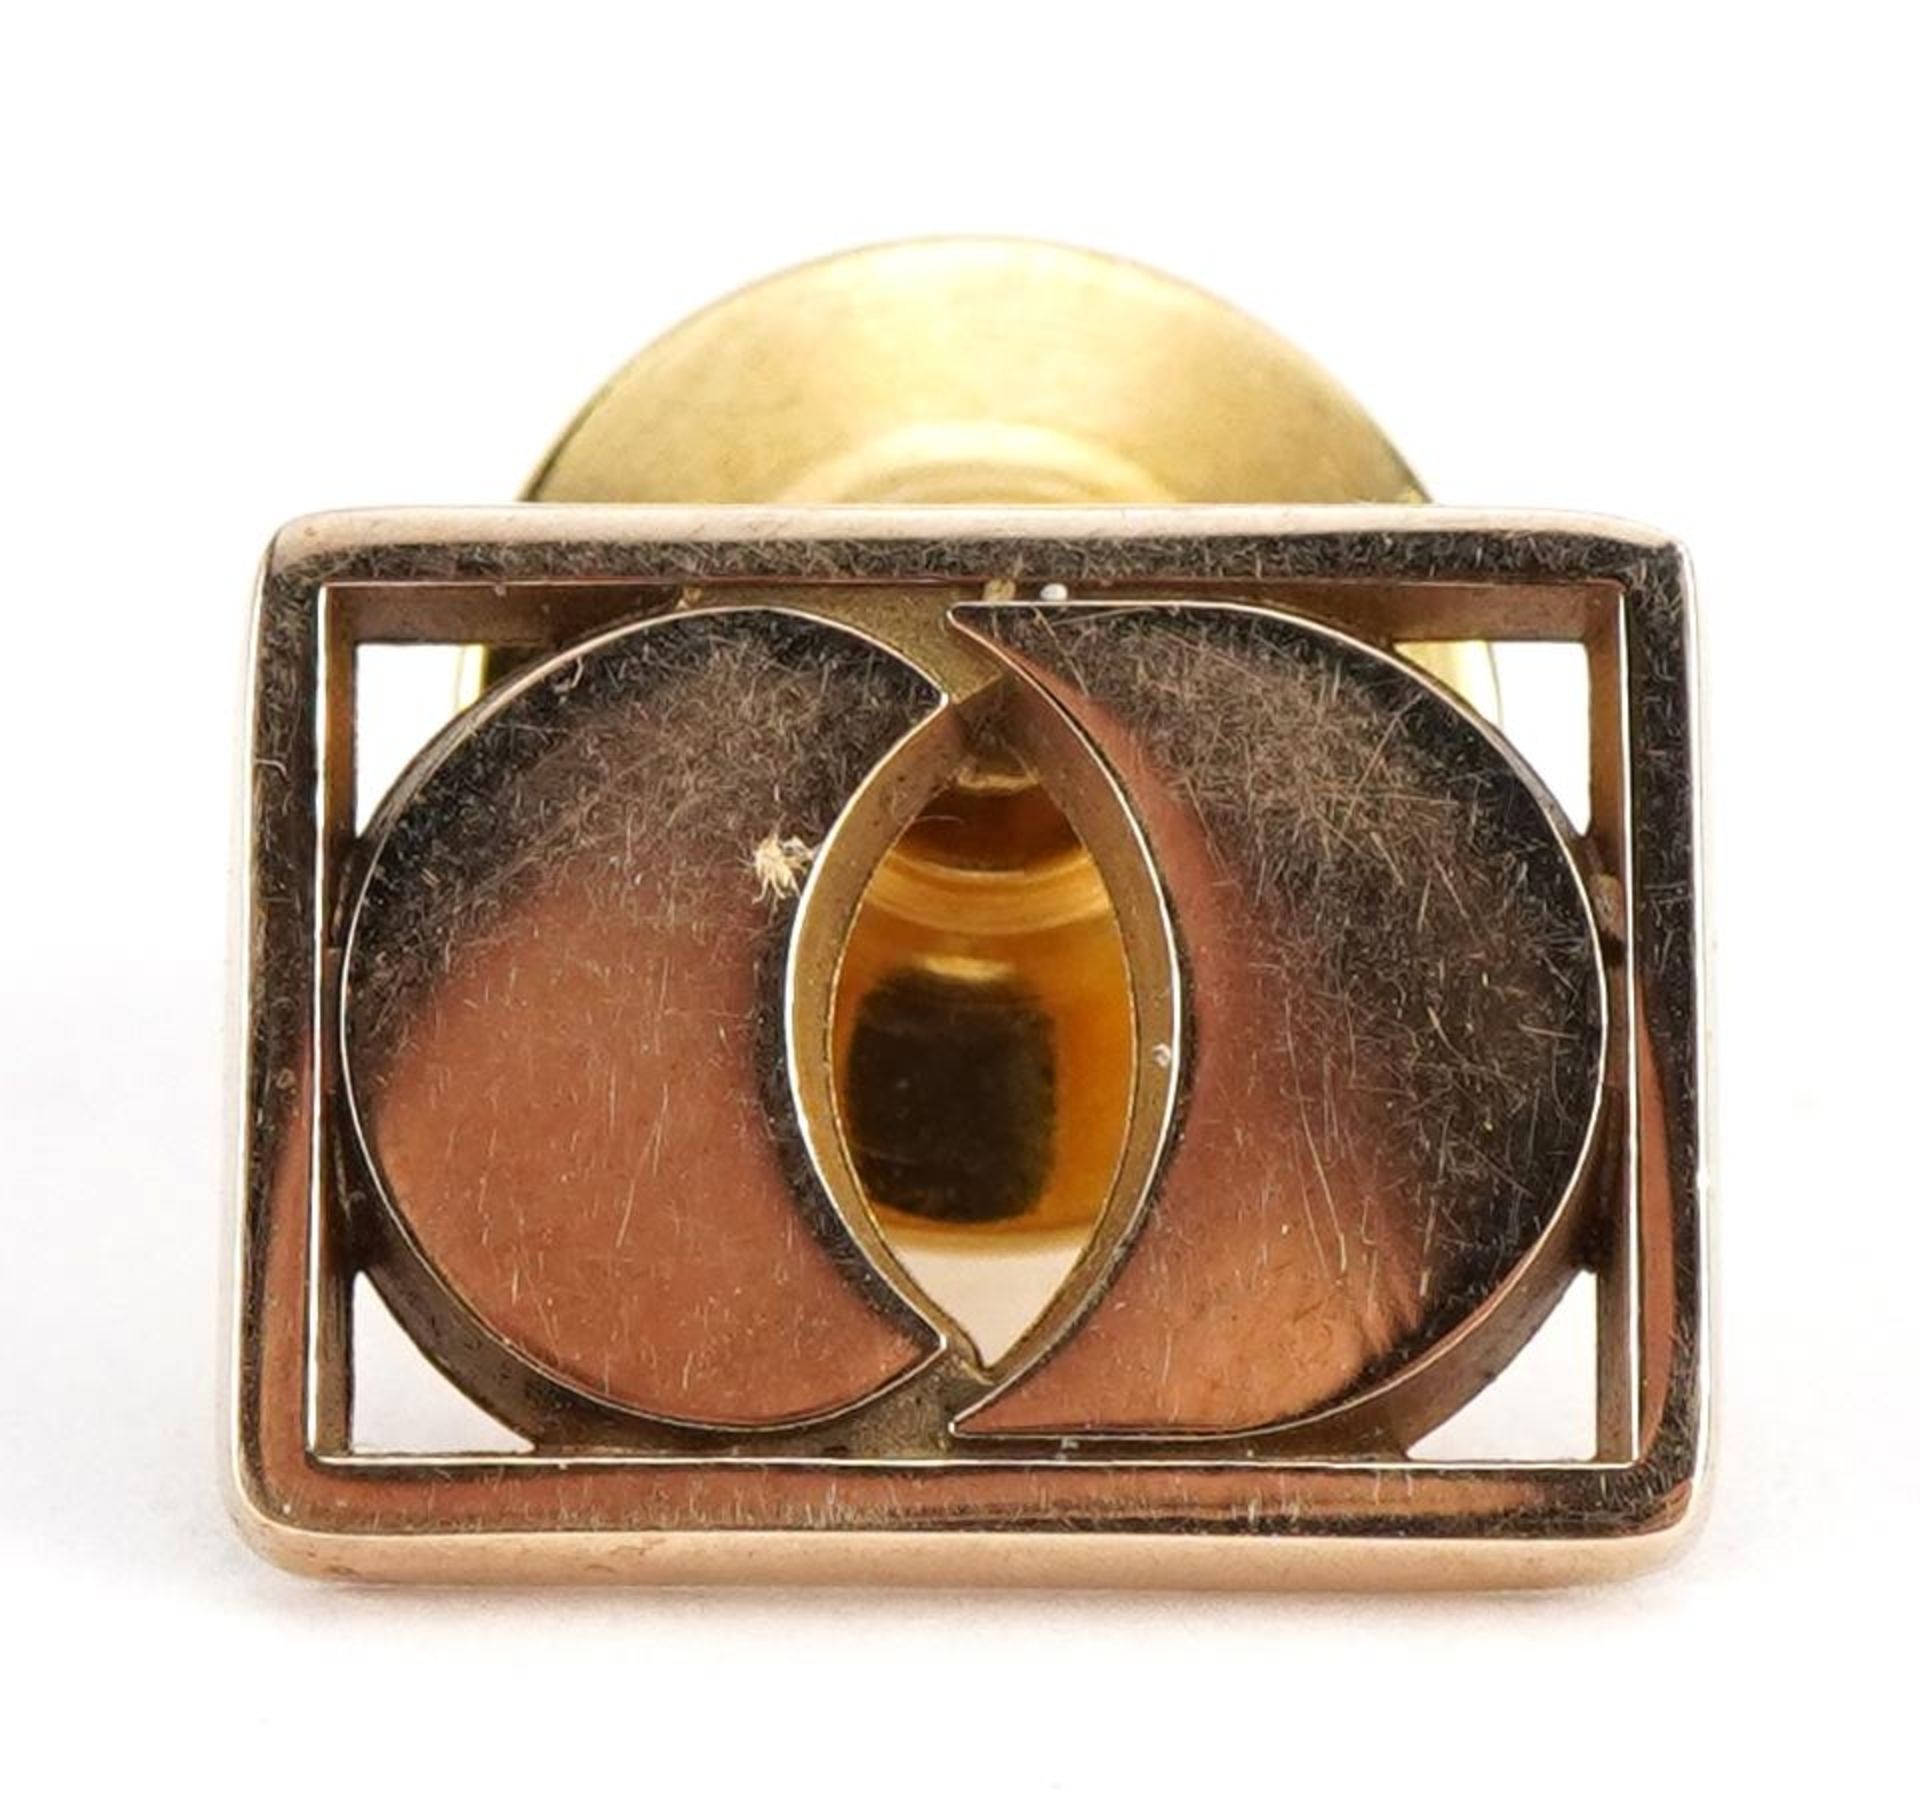 10k gold tie tack, 1.5cm wide, 3.8g : For further information on this lot please contact the